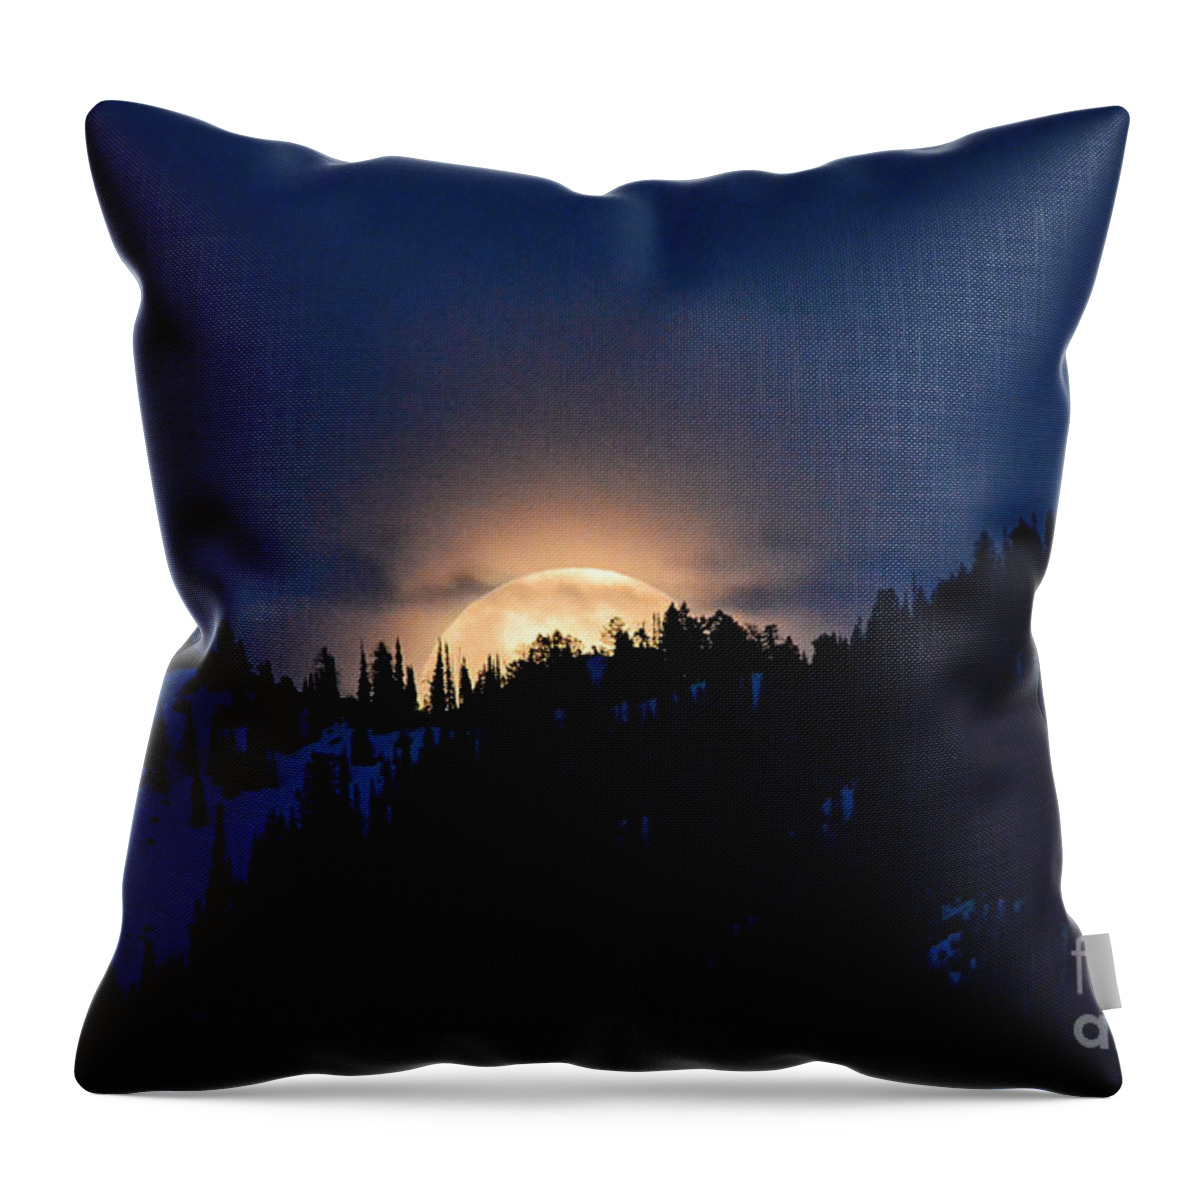 Full Moon Throw Pillow featuring the photograph Full Flower Moon #4 by Dorrene BrownButterfield